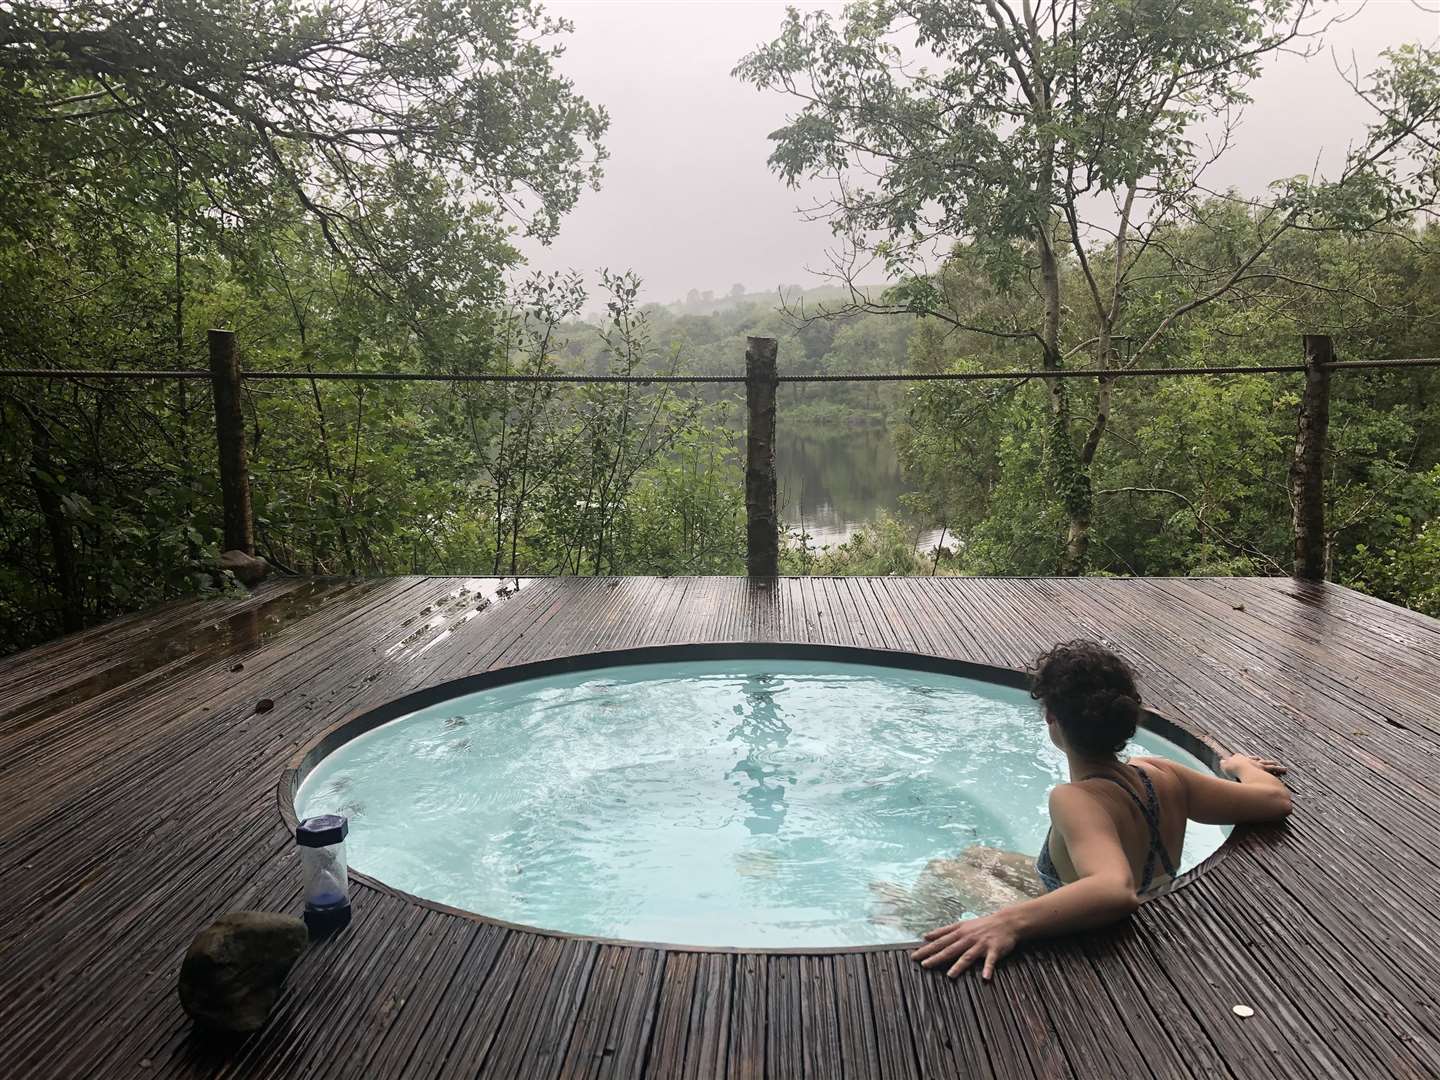 Sarah in the hot tub at Finn Lough. Picture: PA Photo/Sarah Marshall